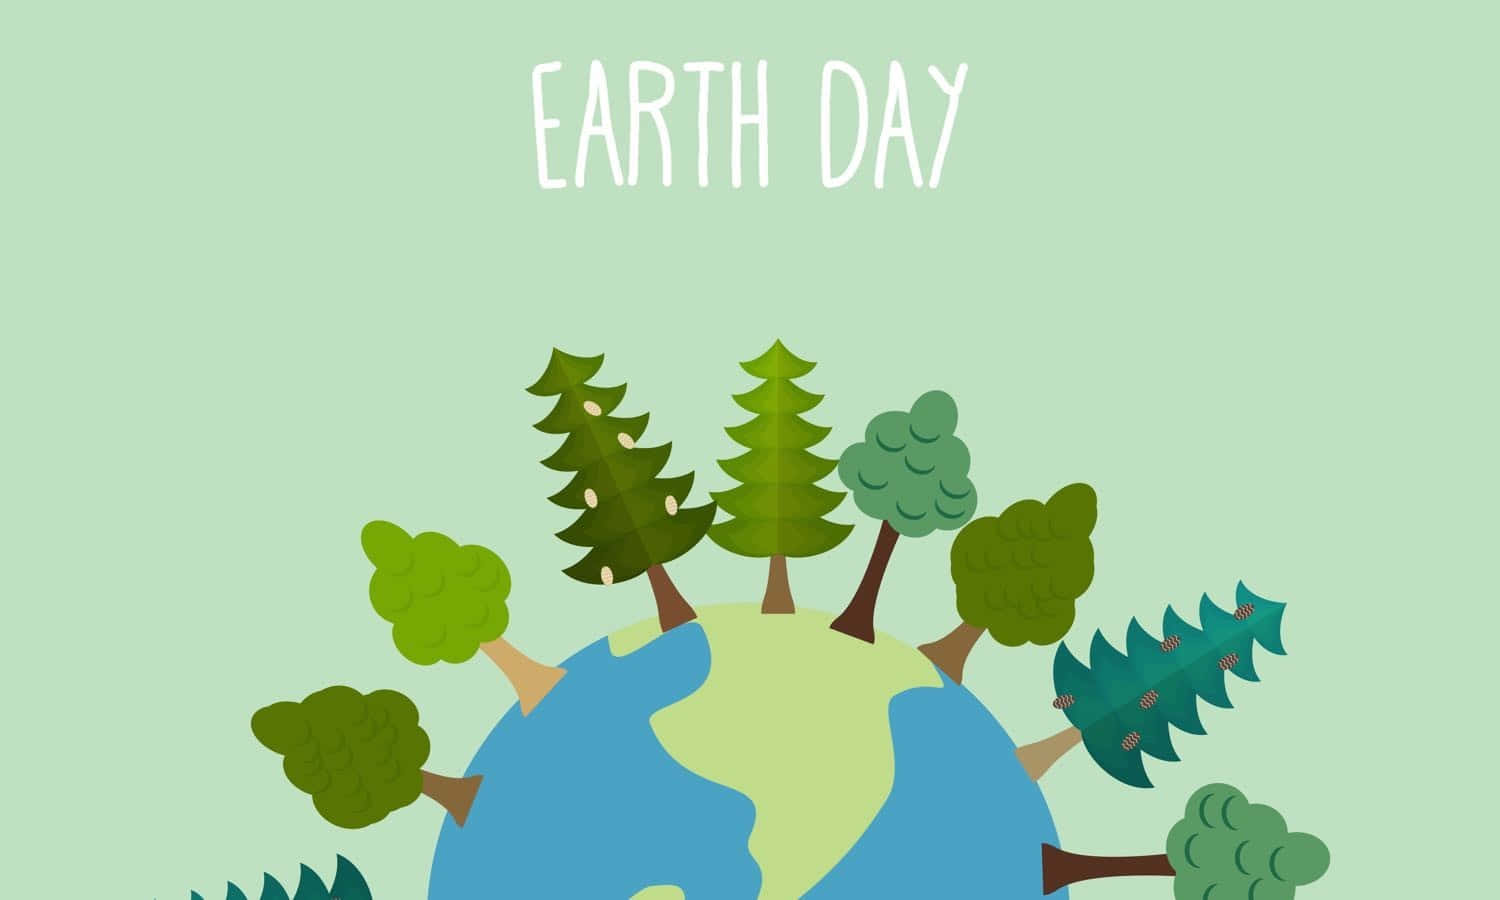 Earth Day With Trees And A Globe